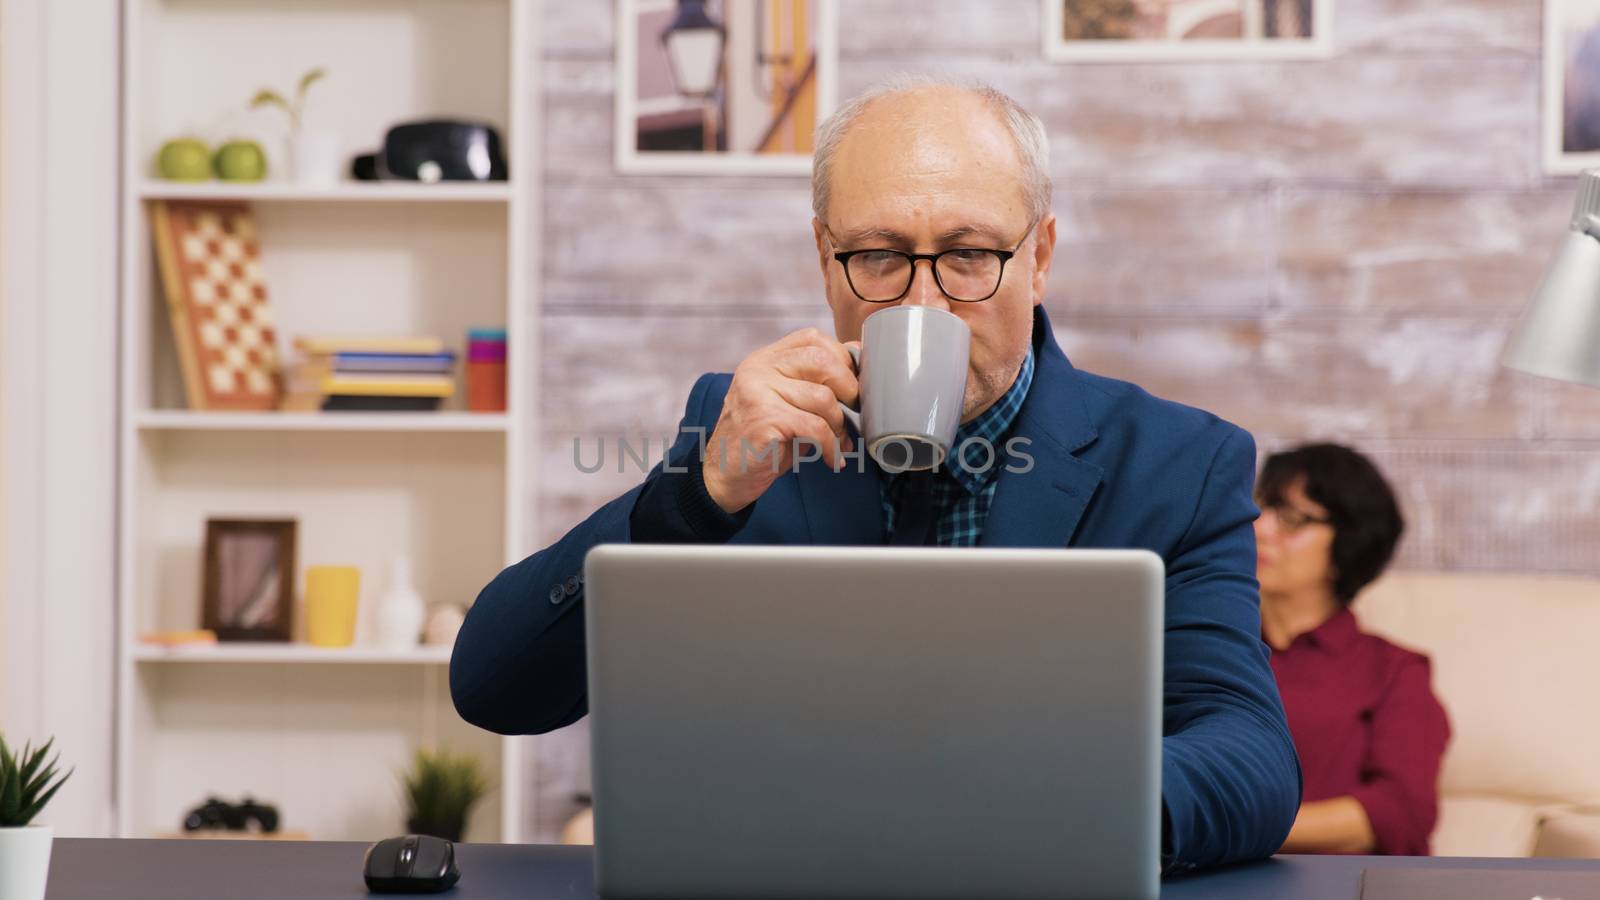 Old man enjoying a cup of coffee while working on laptop in living room. Wife watching tv in the backgroun sitting on the couch.